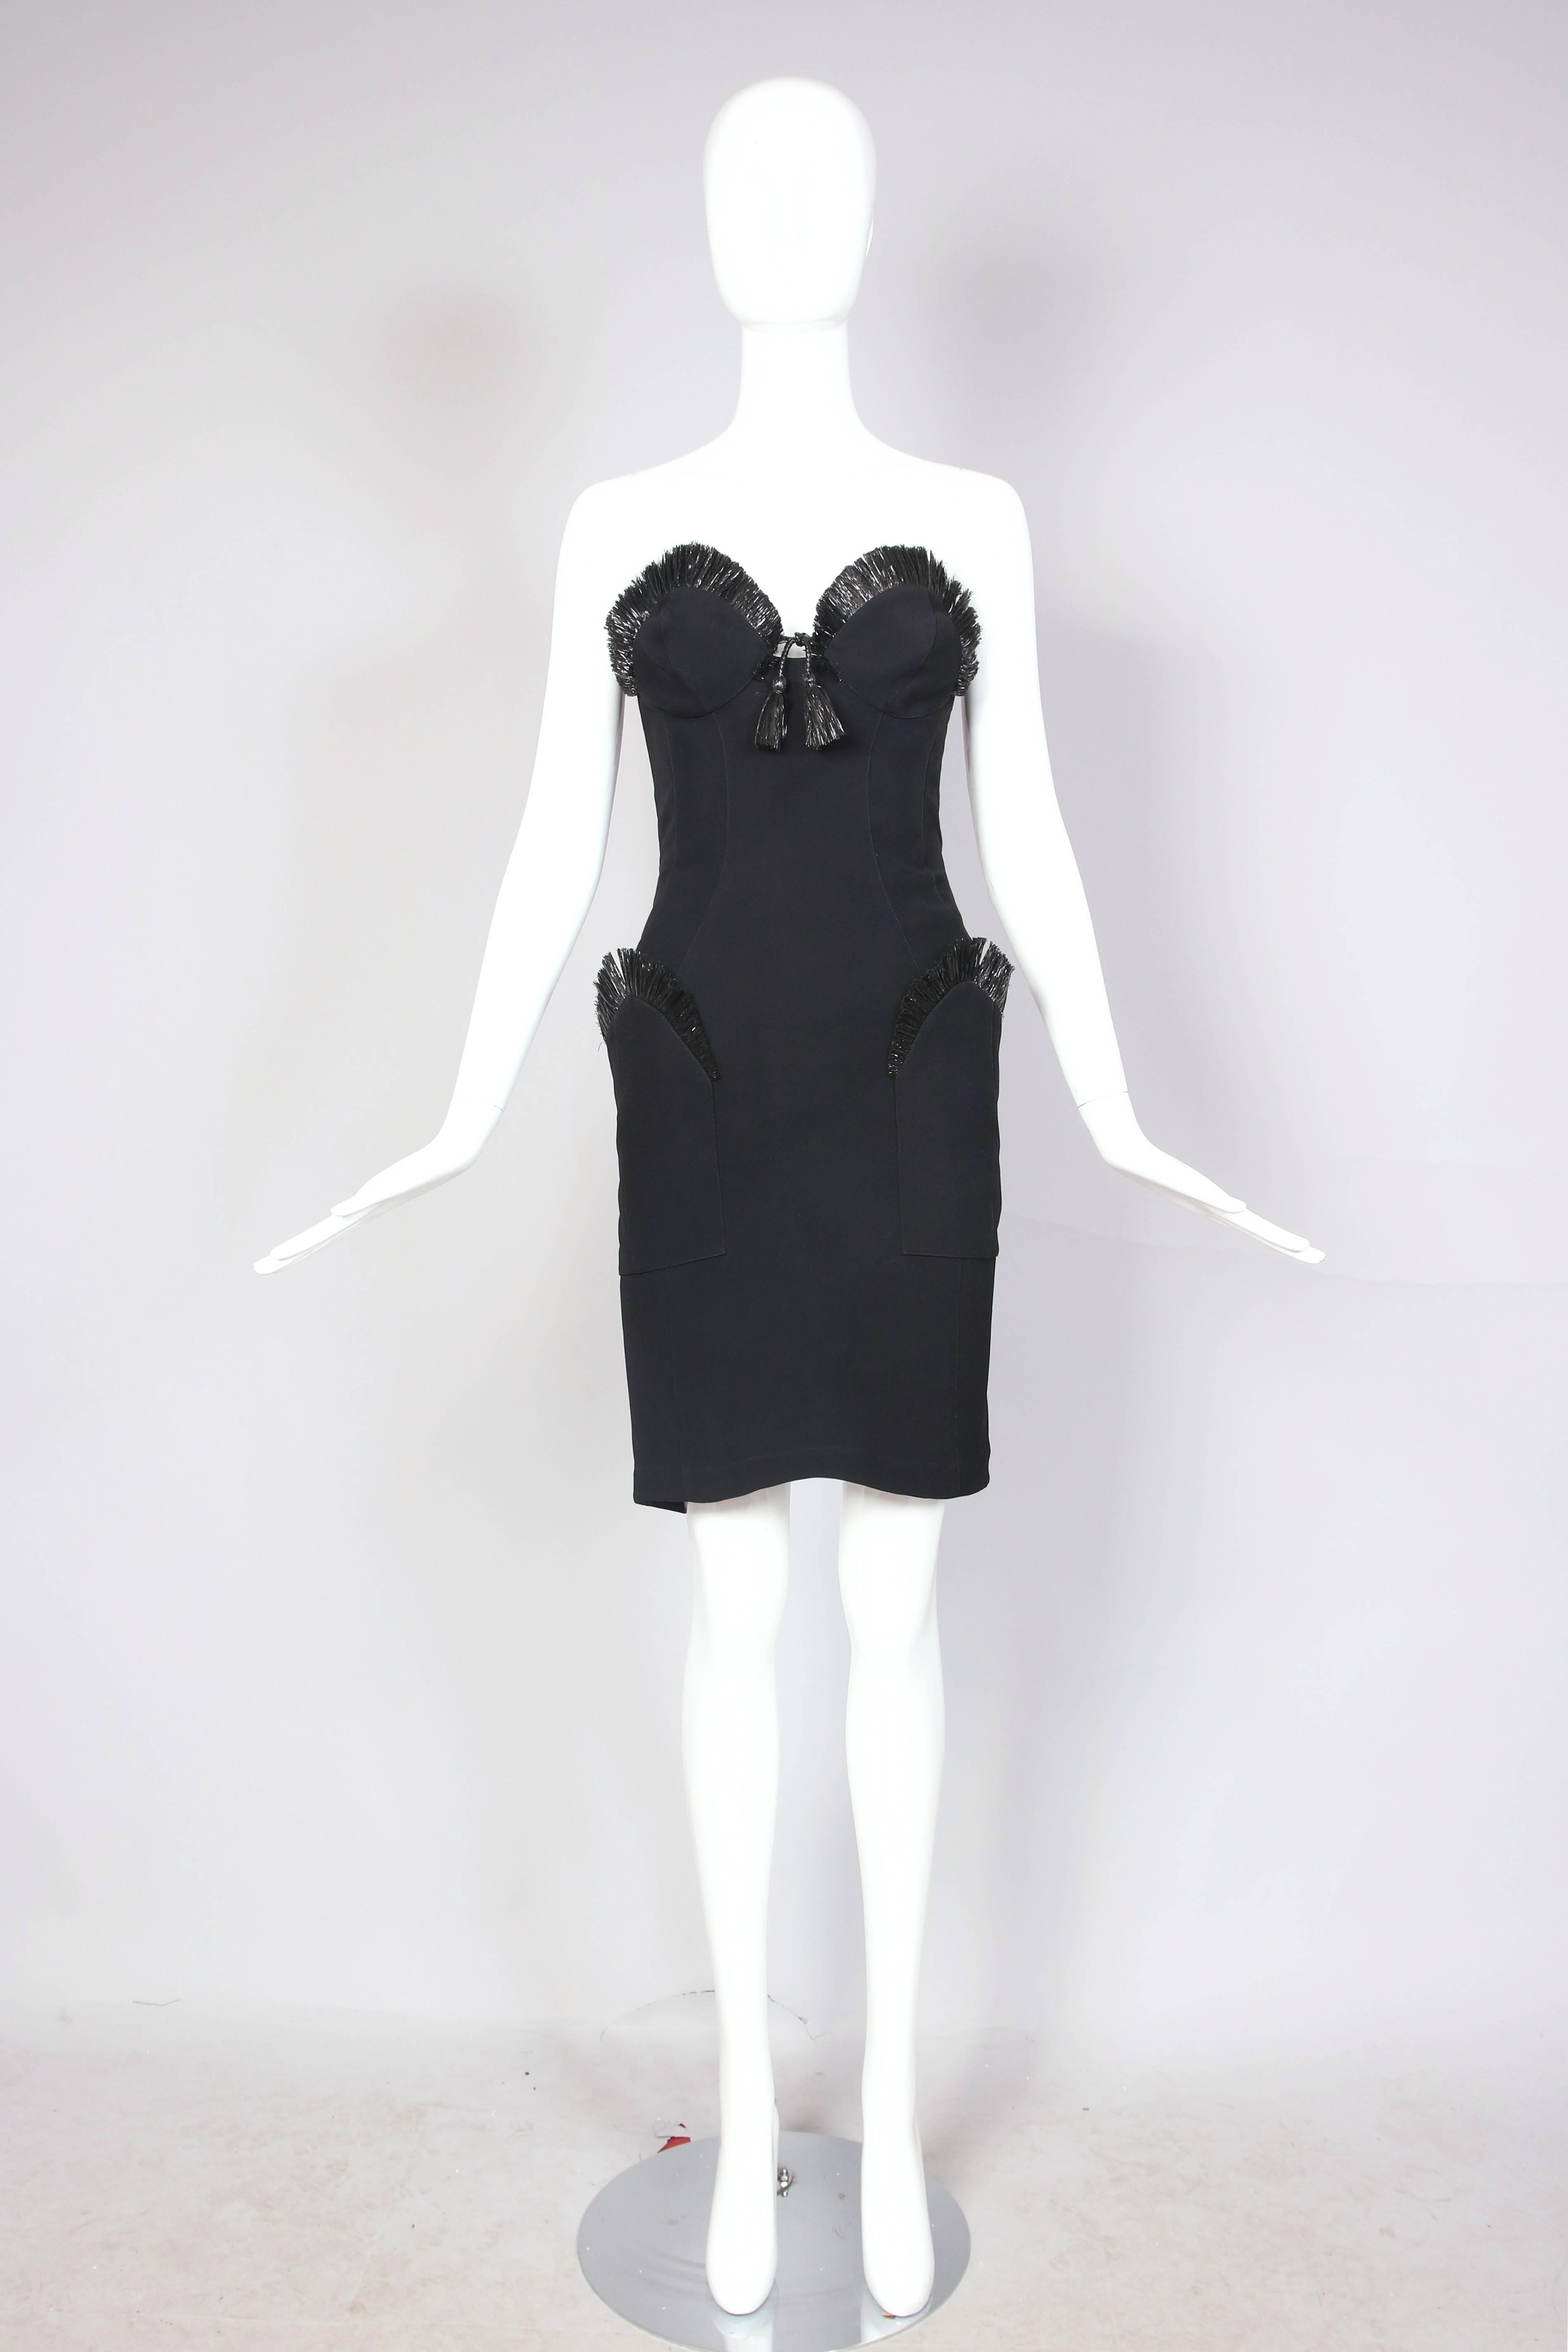 Iconic Thierry Mugler black rayon blend cocktail dress with architectural construction - featuring raffia trim at pocket edge, bodice edge and ending in tassel detail at dip in bust. Subtle waterfall shape at front hem. In excellent condition -